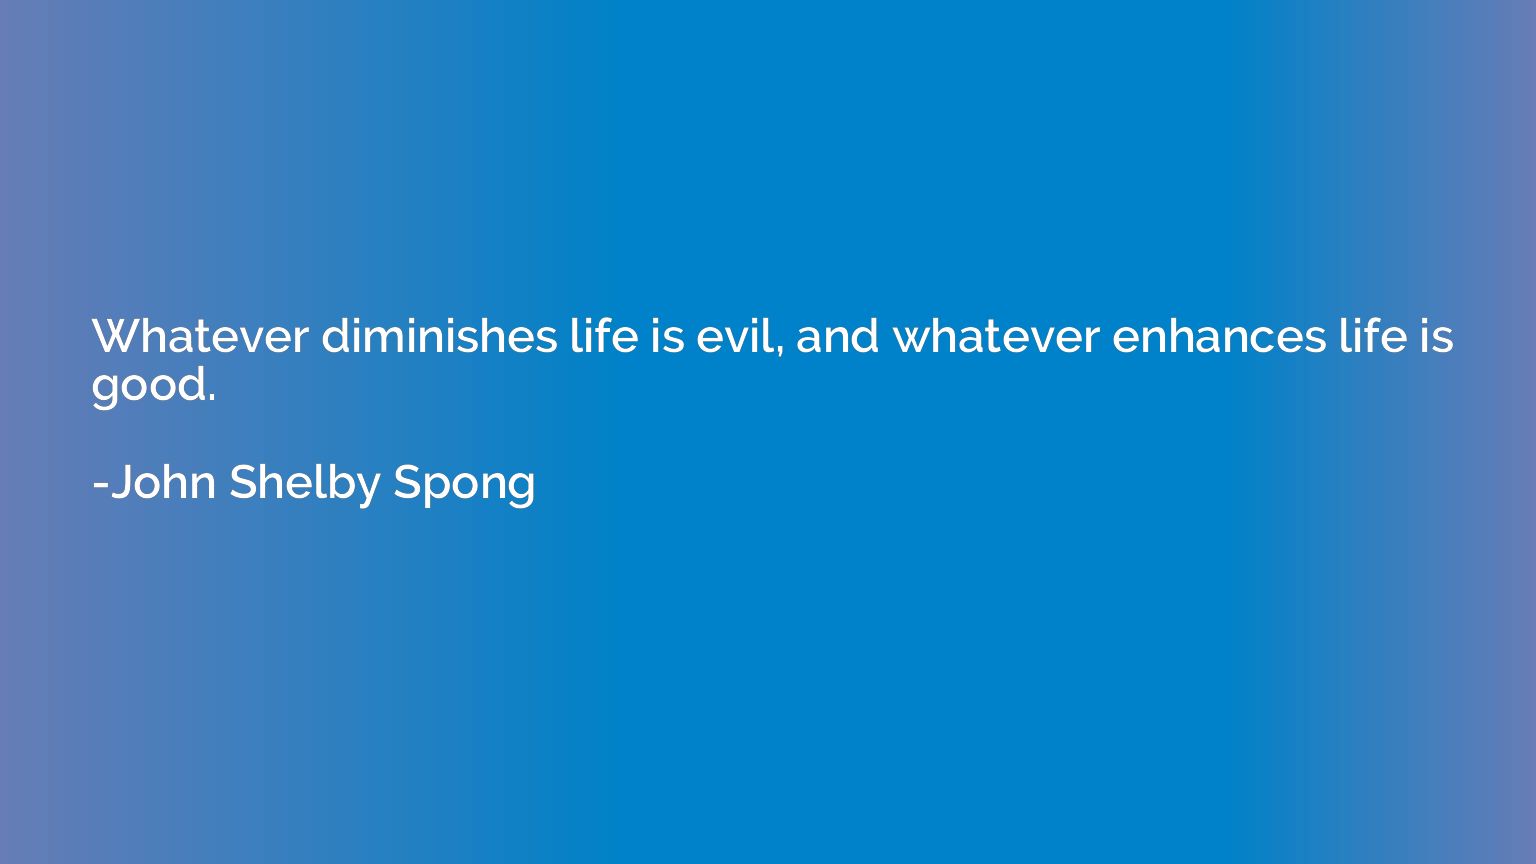 Whatever diminishes life is evil, and whatever enhances life